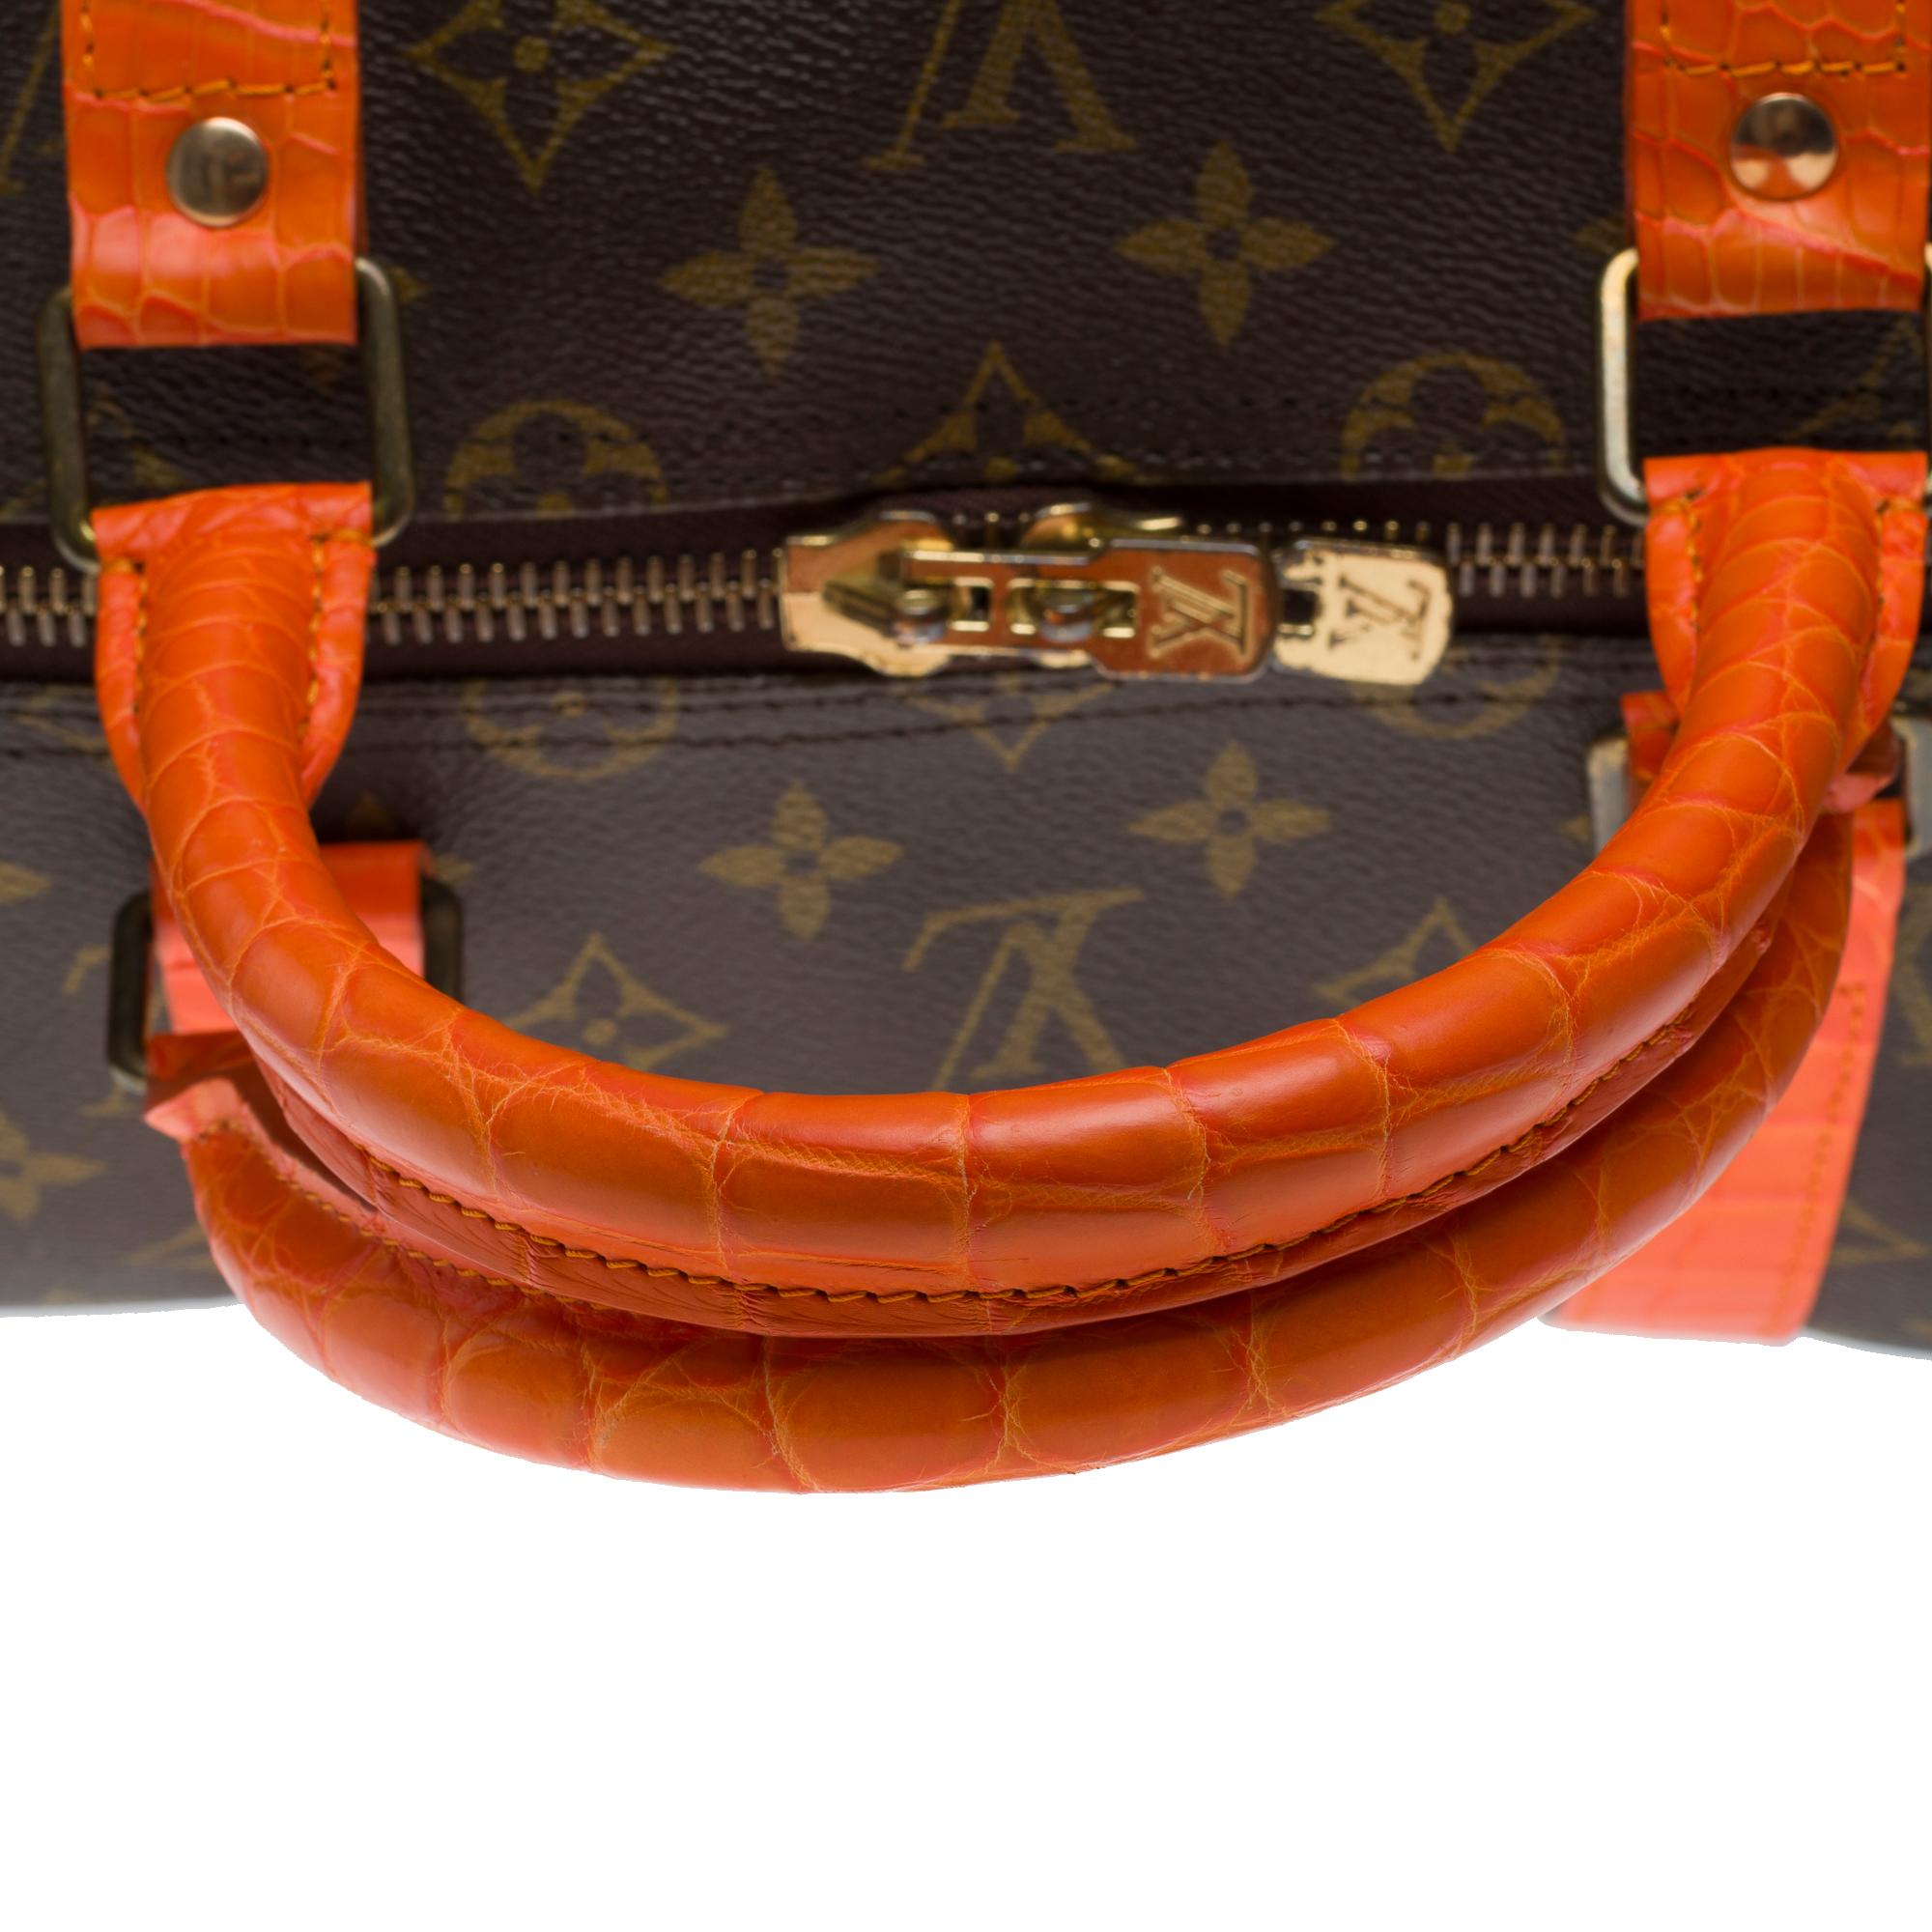 Customized Louis Vuitton Keepall 55 strap Travel bag with Orange Crocodile For Sale 3